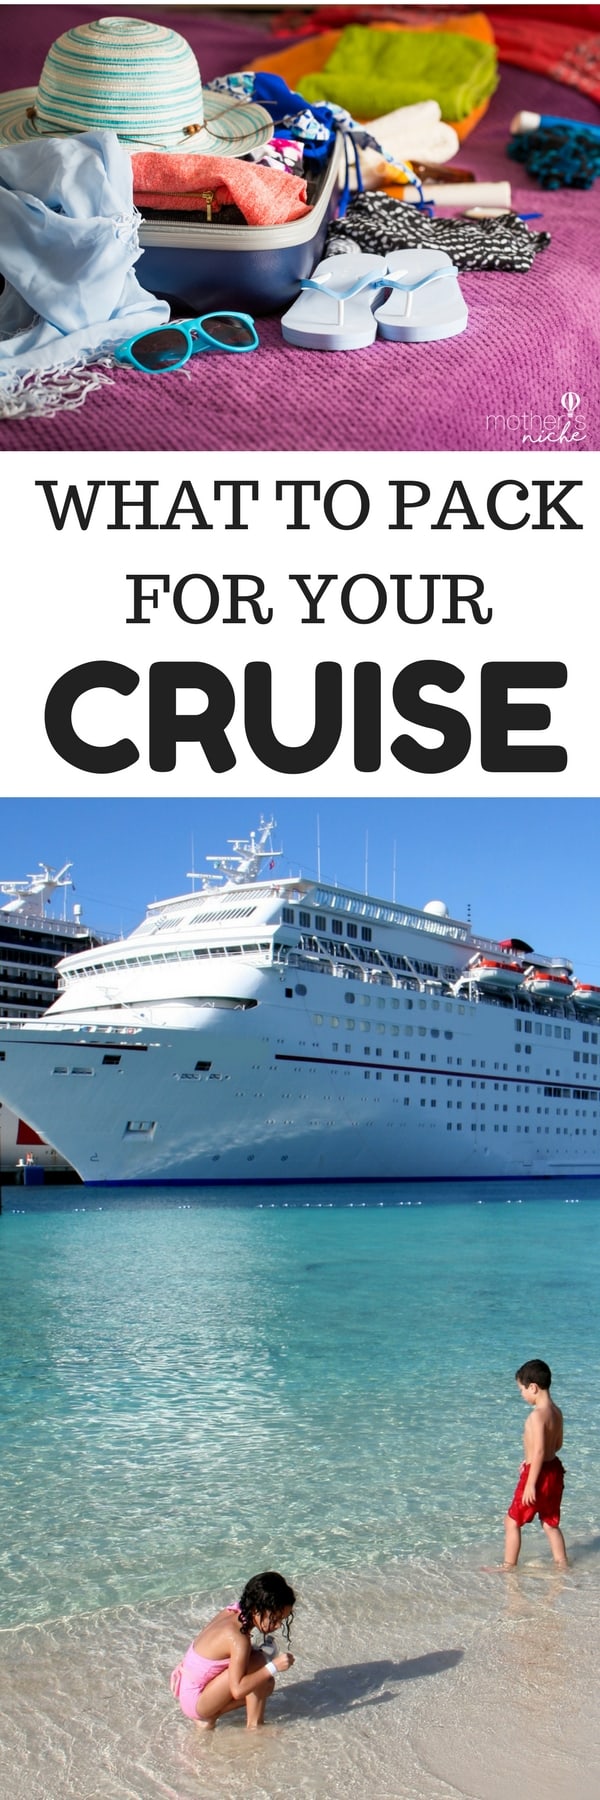 What to pack for your cruise! Lots of cruising tips 